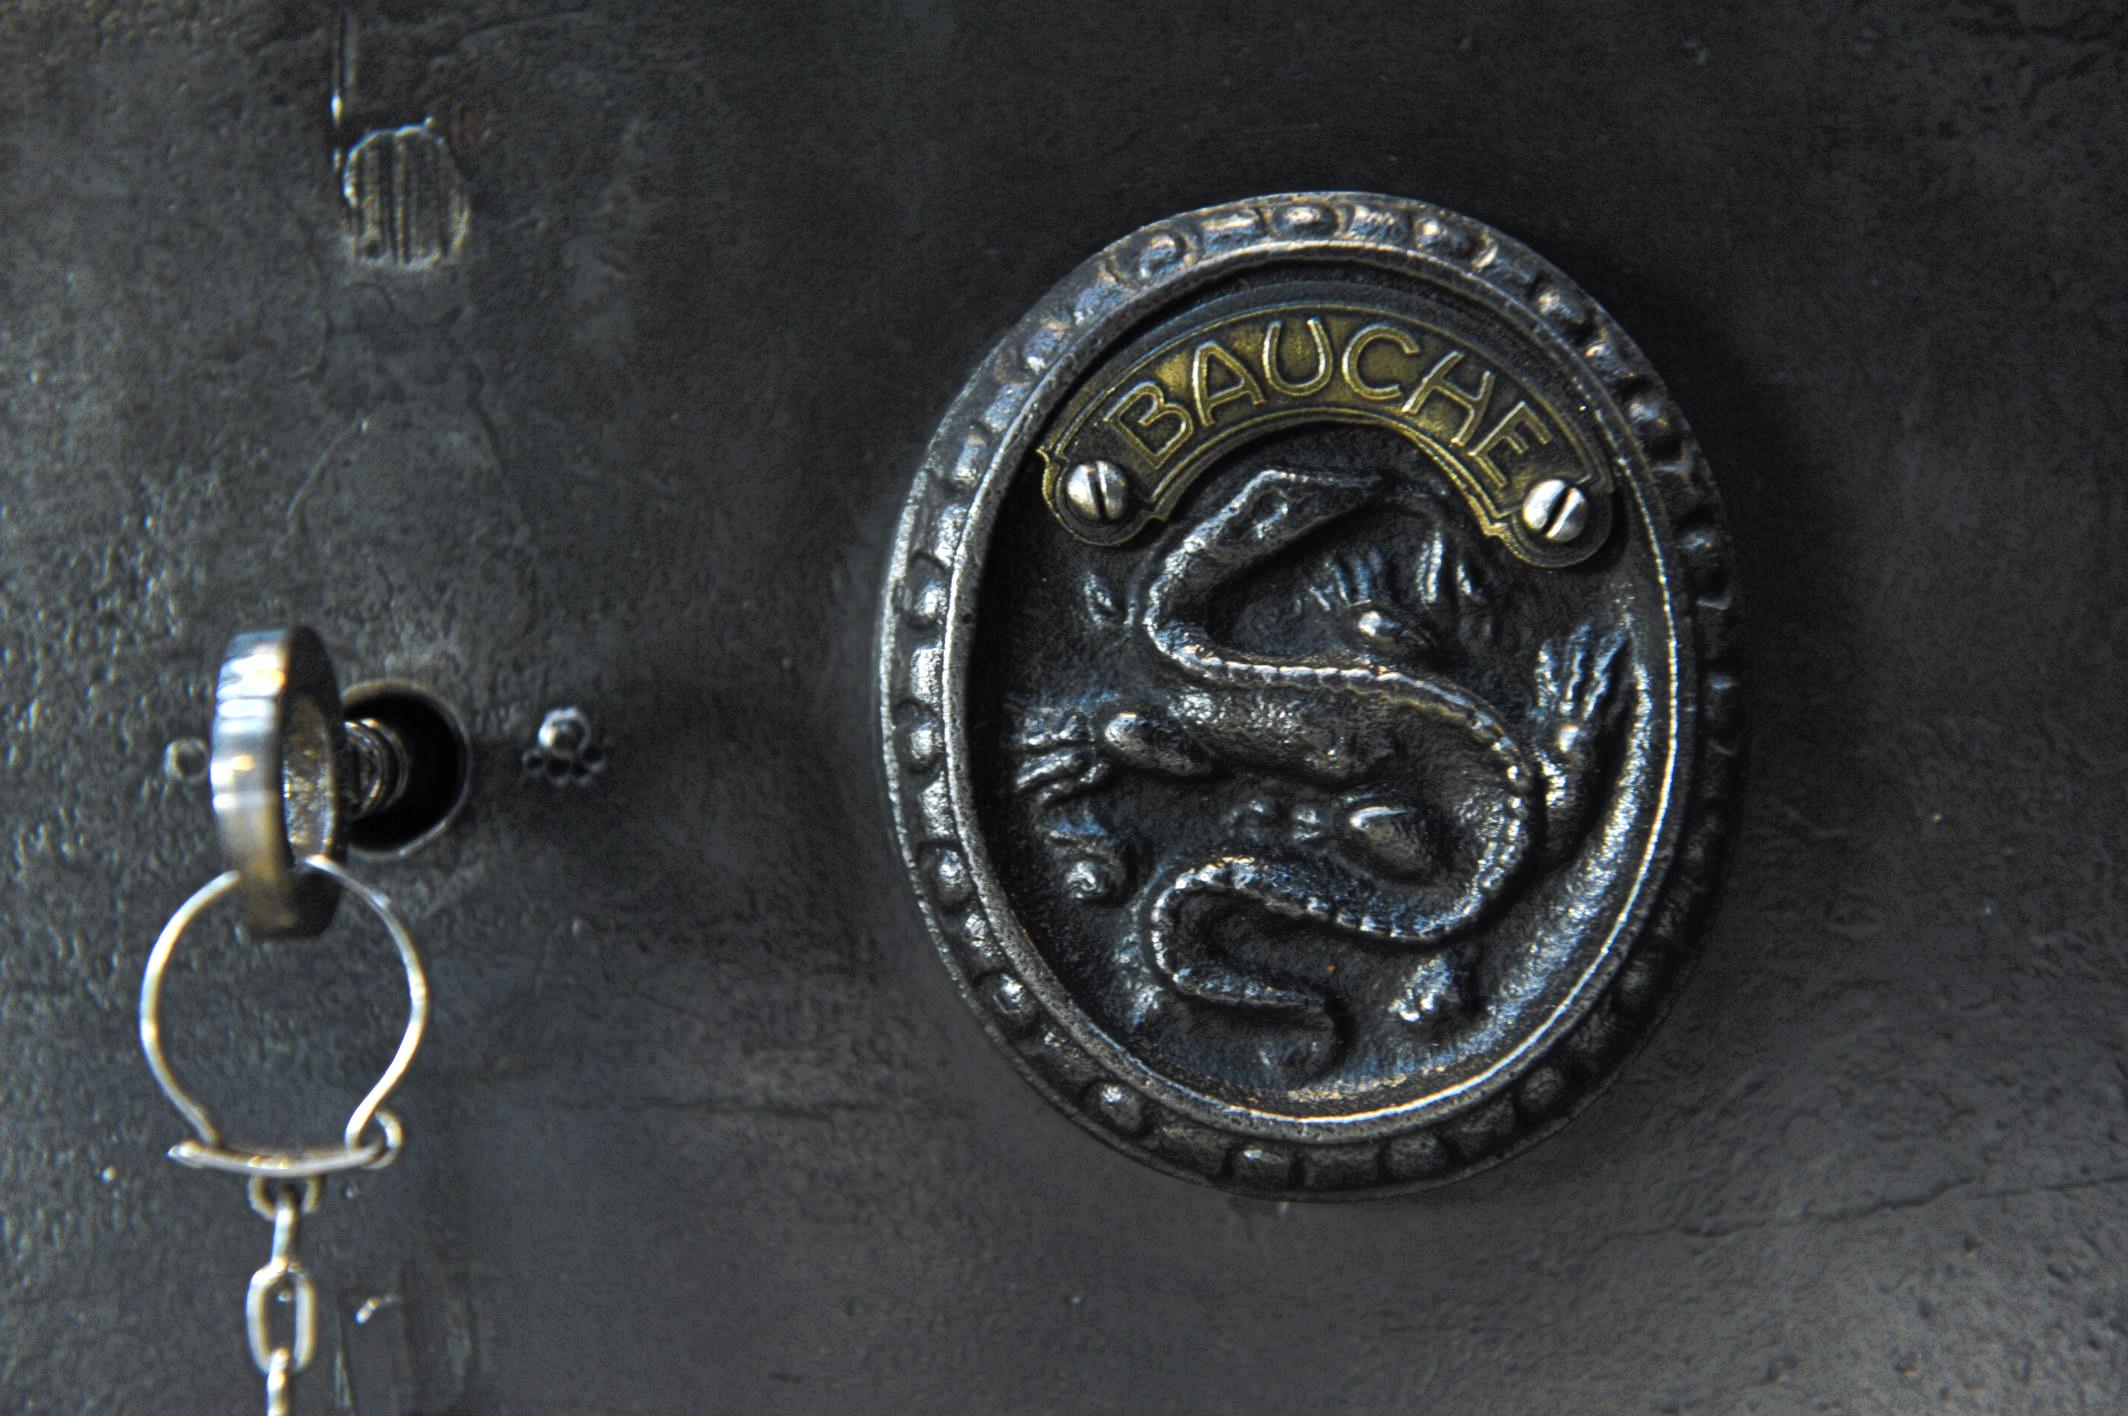 Early 20th Century Bauche Metal Safe with Original Key, 1920s